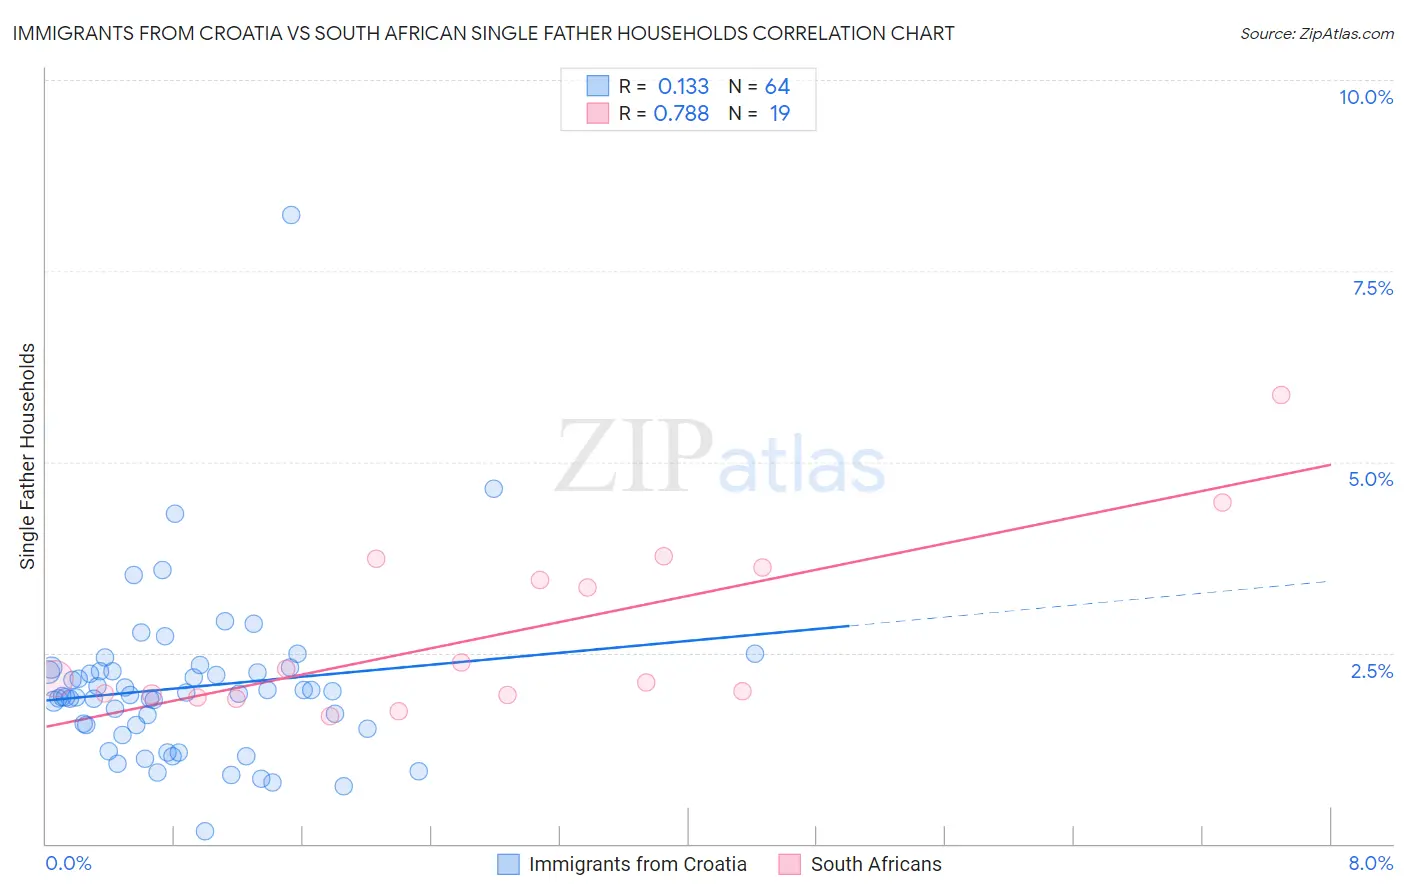 Immigrants from Croatia vs South African Single Father Households